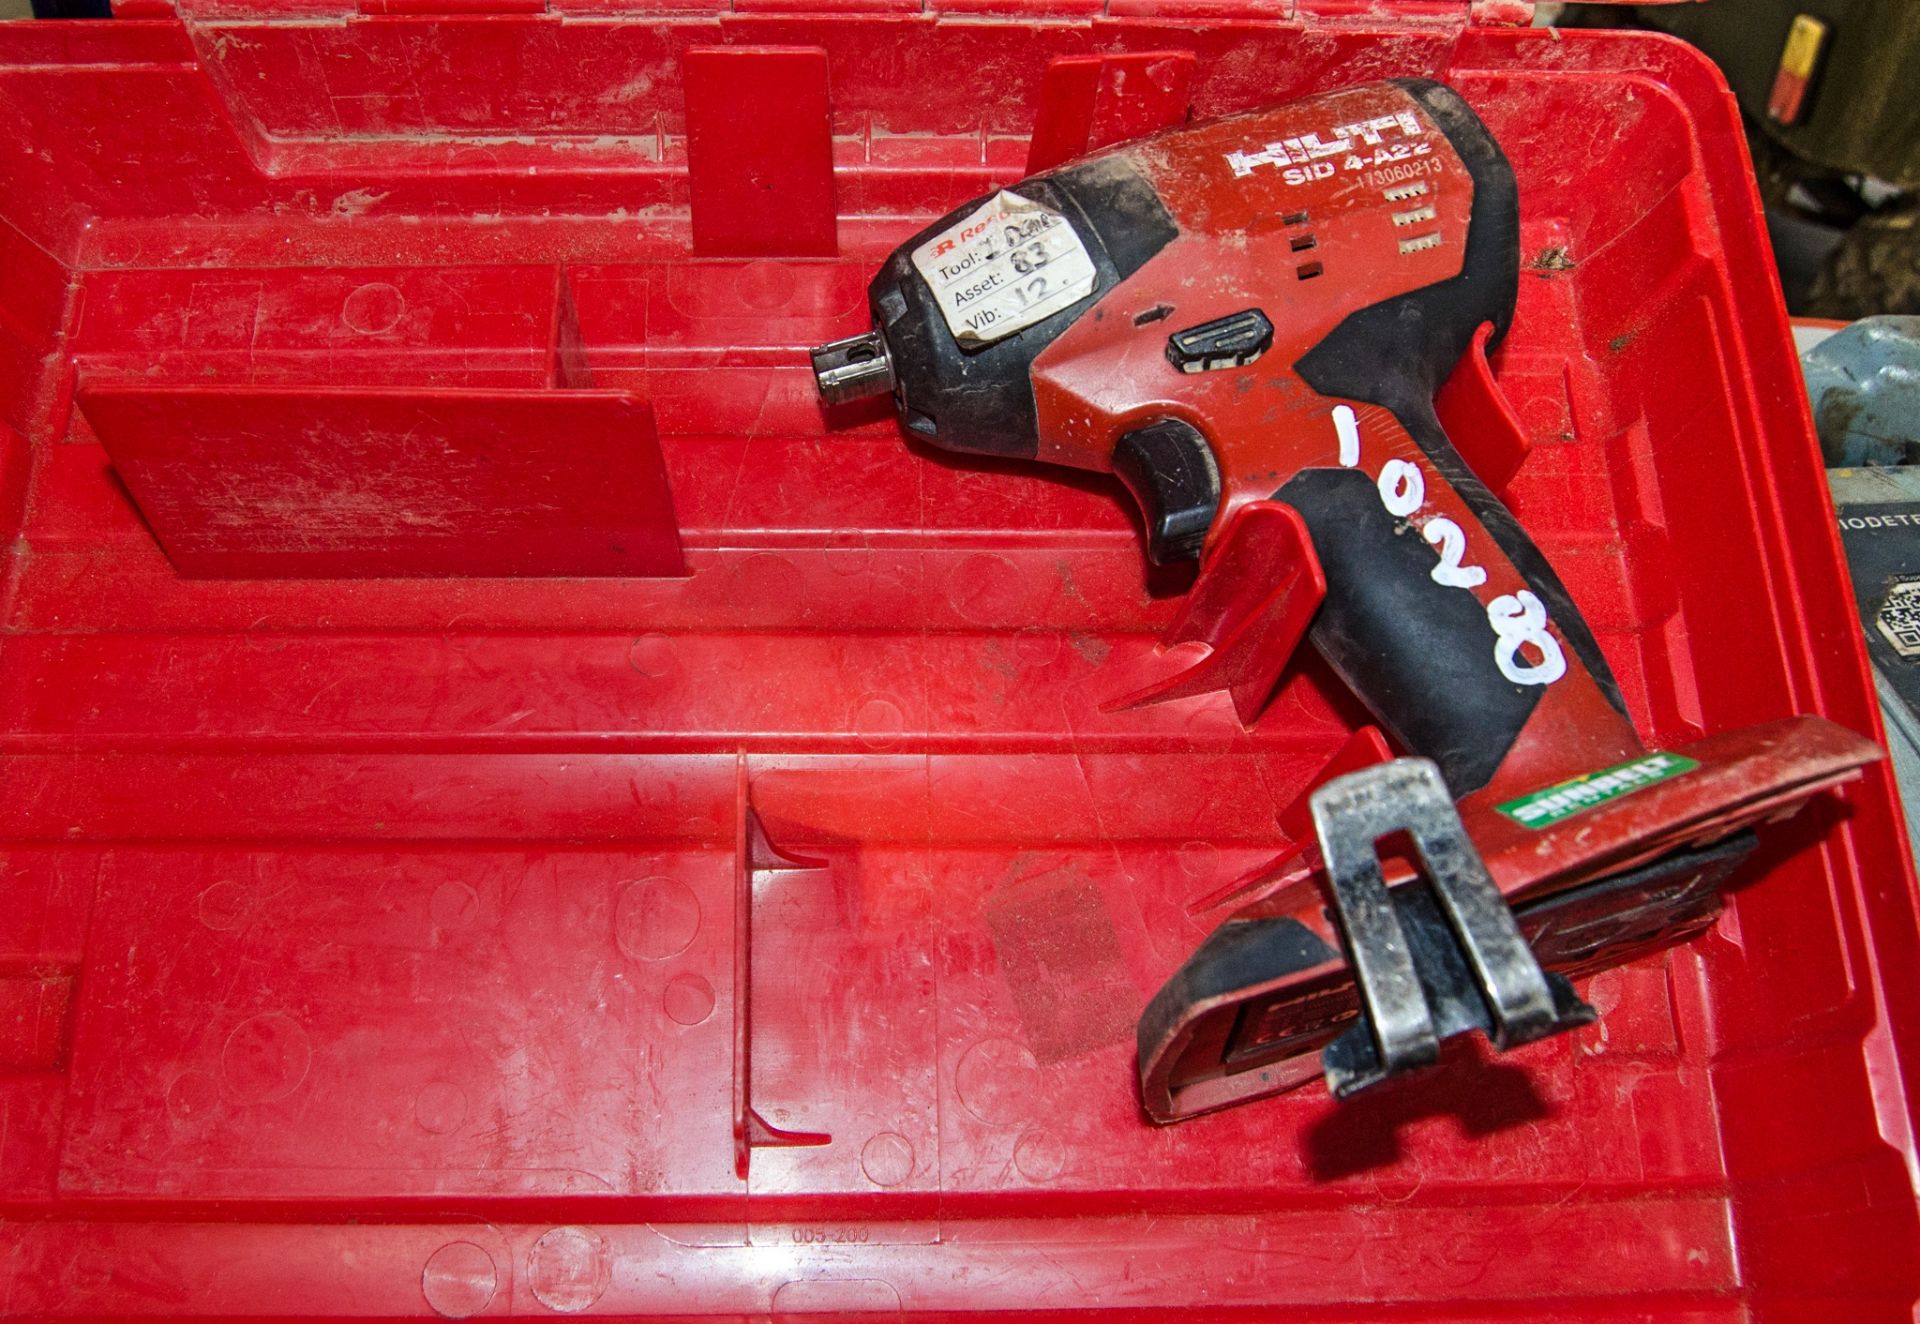 Hilti SID 4-A22 22v cordless screw gun c/w carry case ** No battery or charger ** A981873